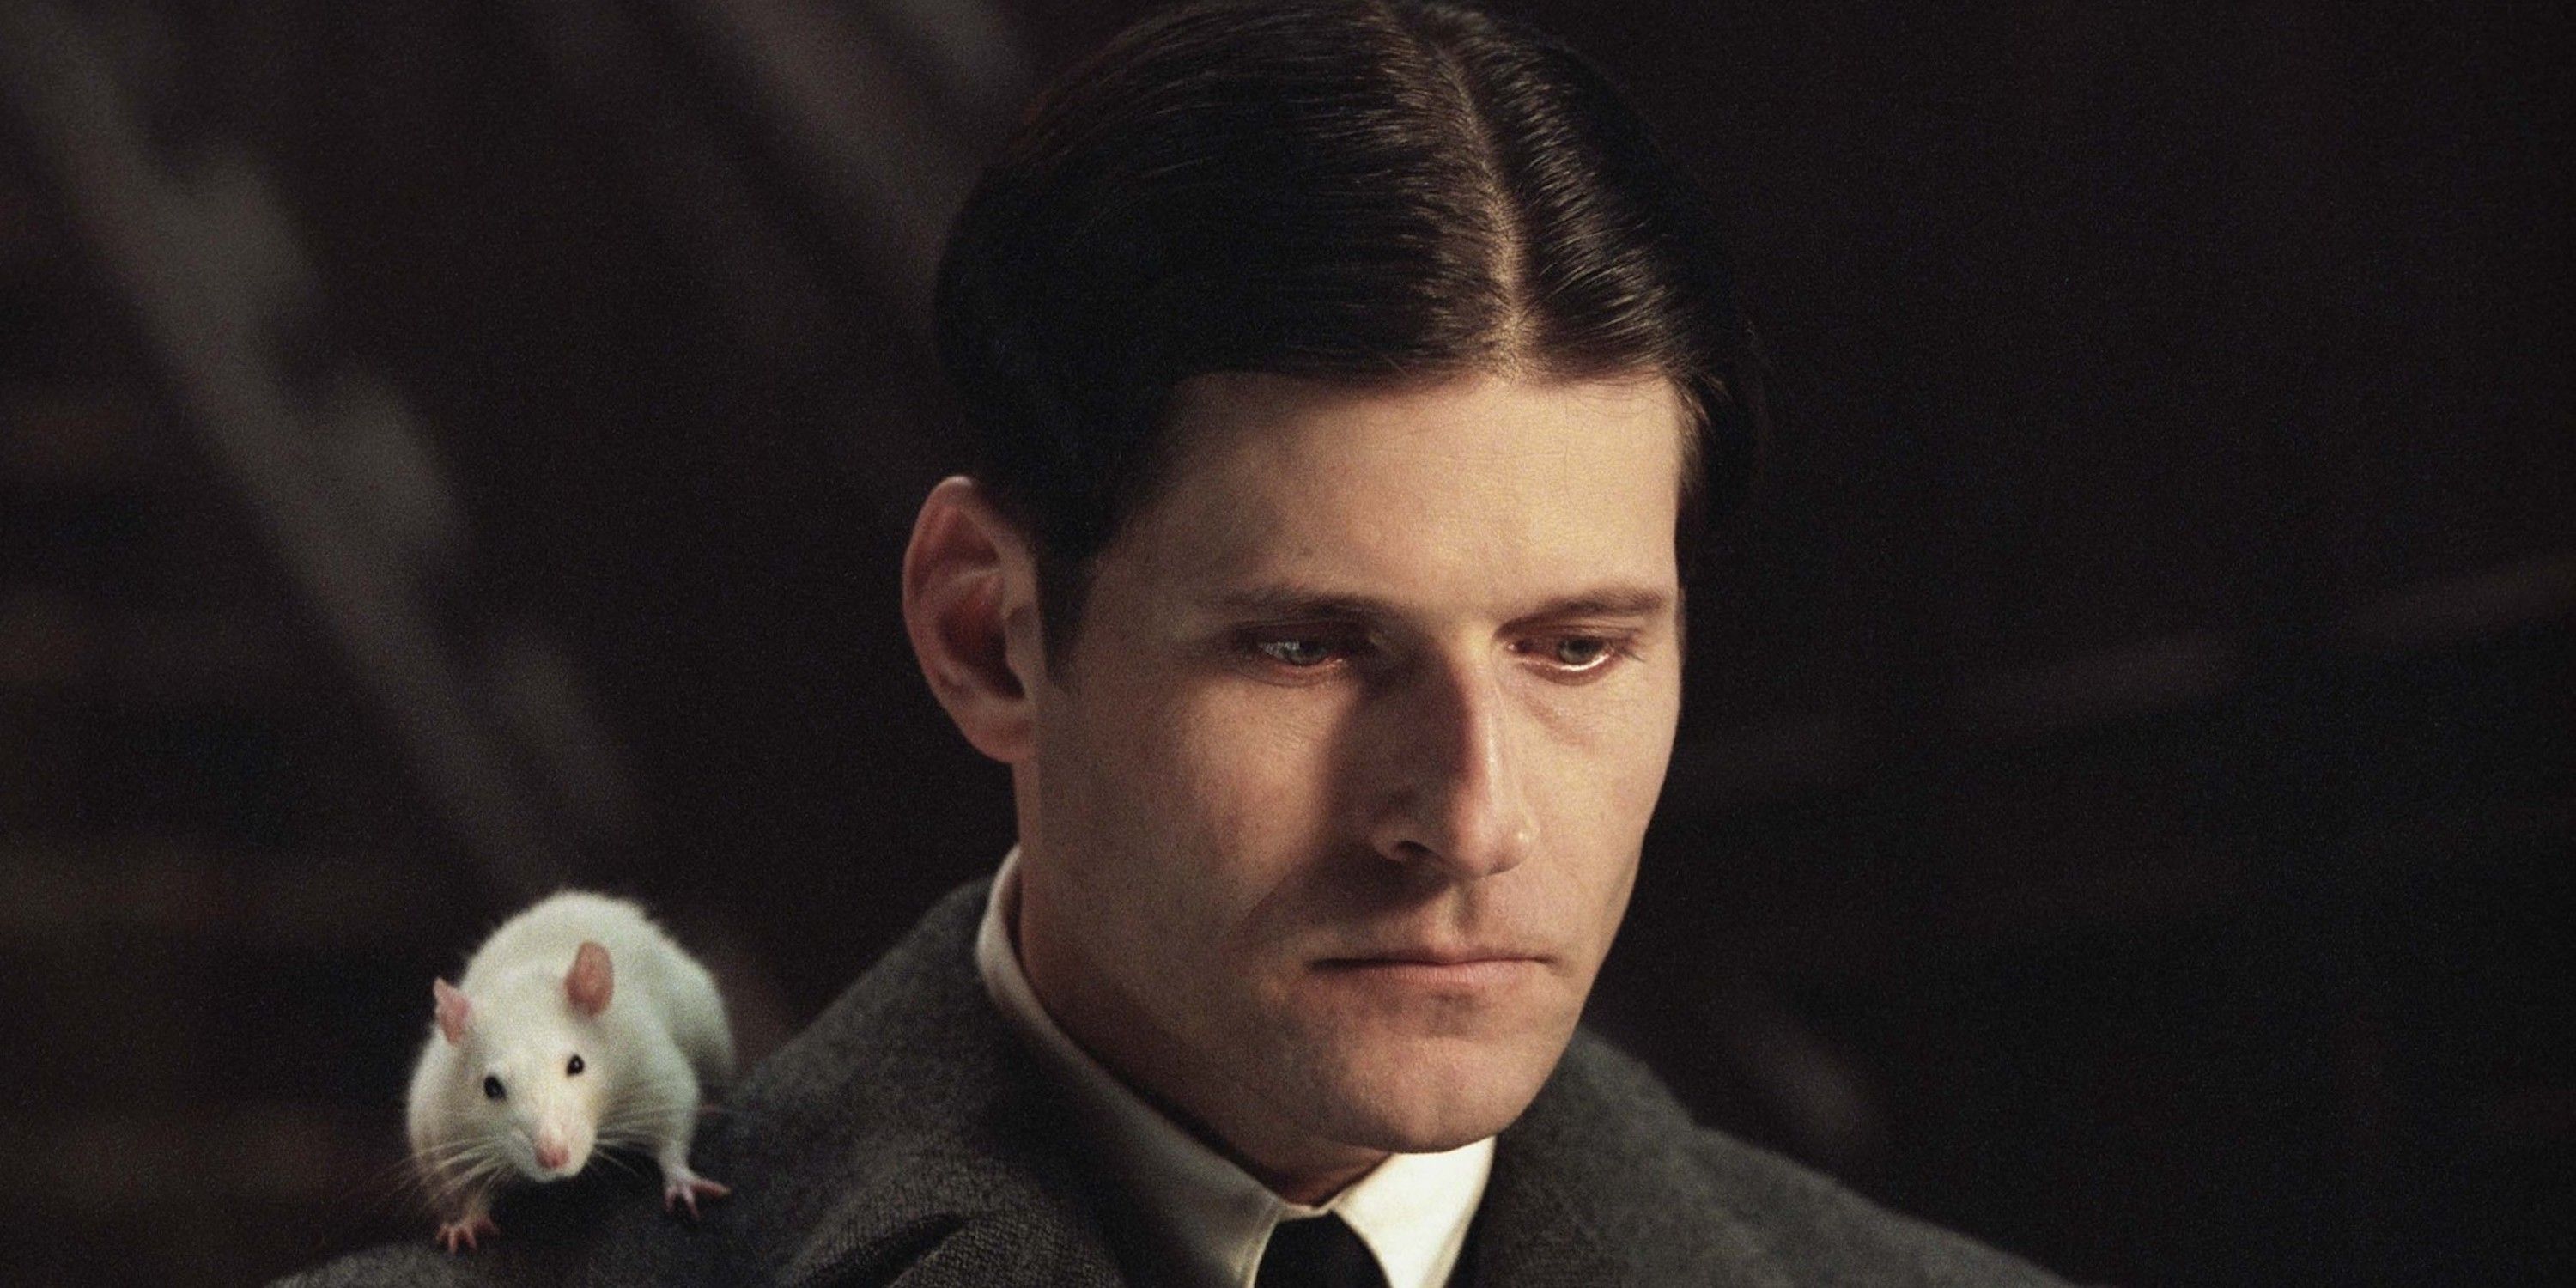 Crispin Glover with a rat on his shoulder in Willard